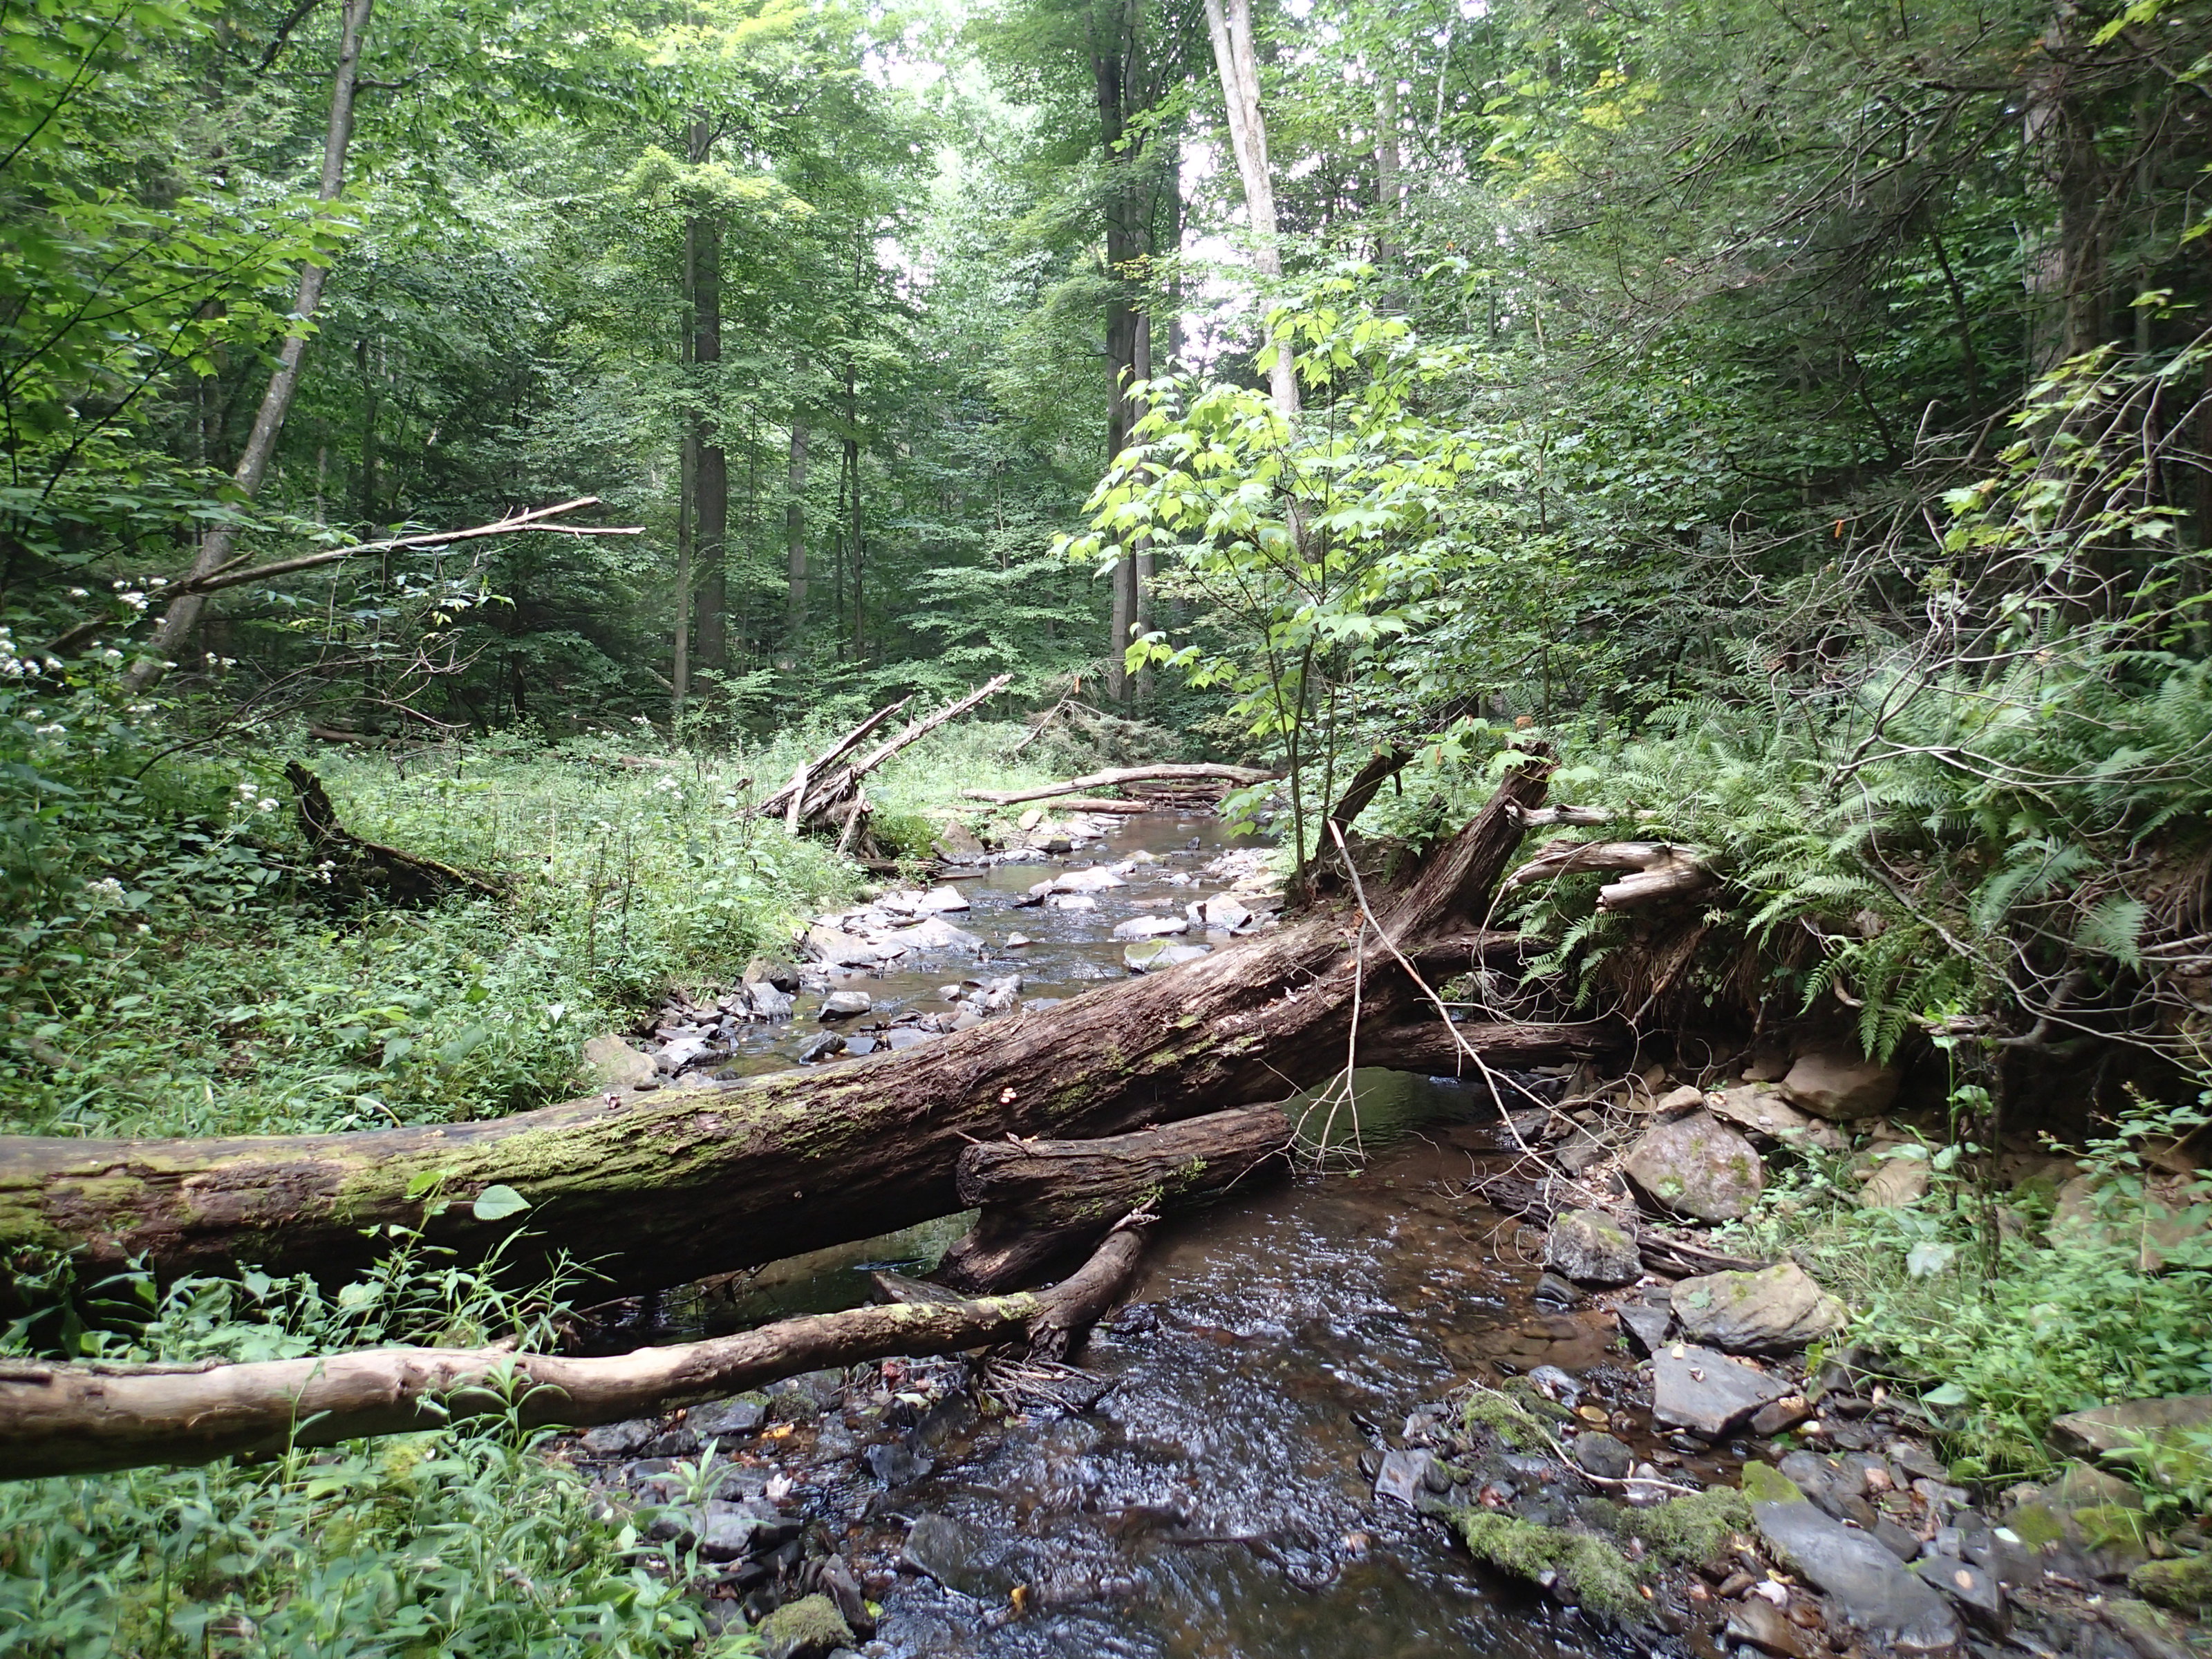 View of stream in a wooded area